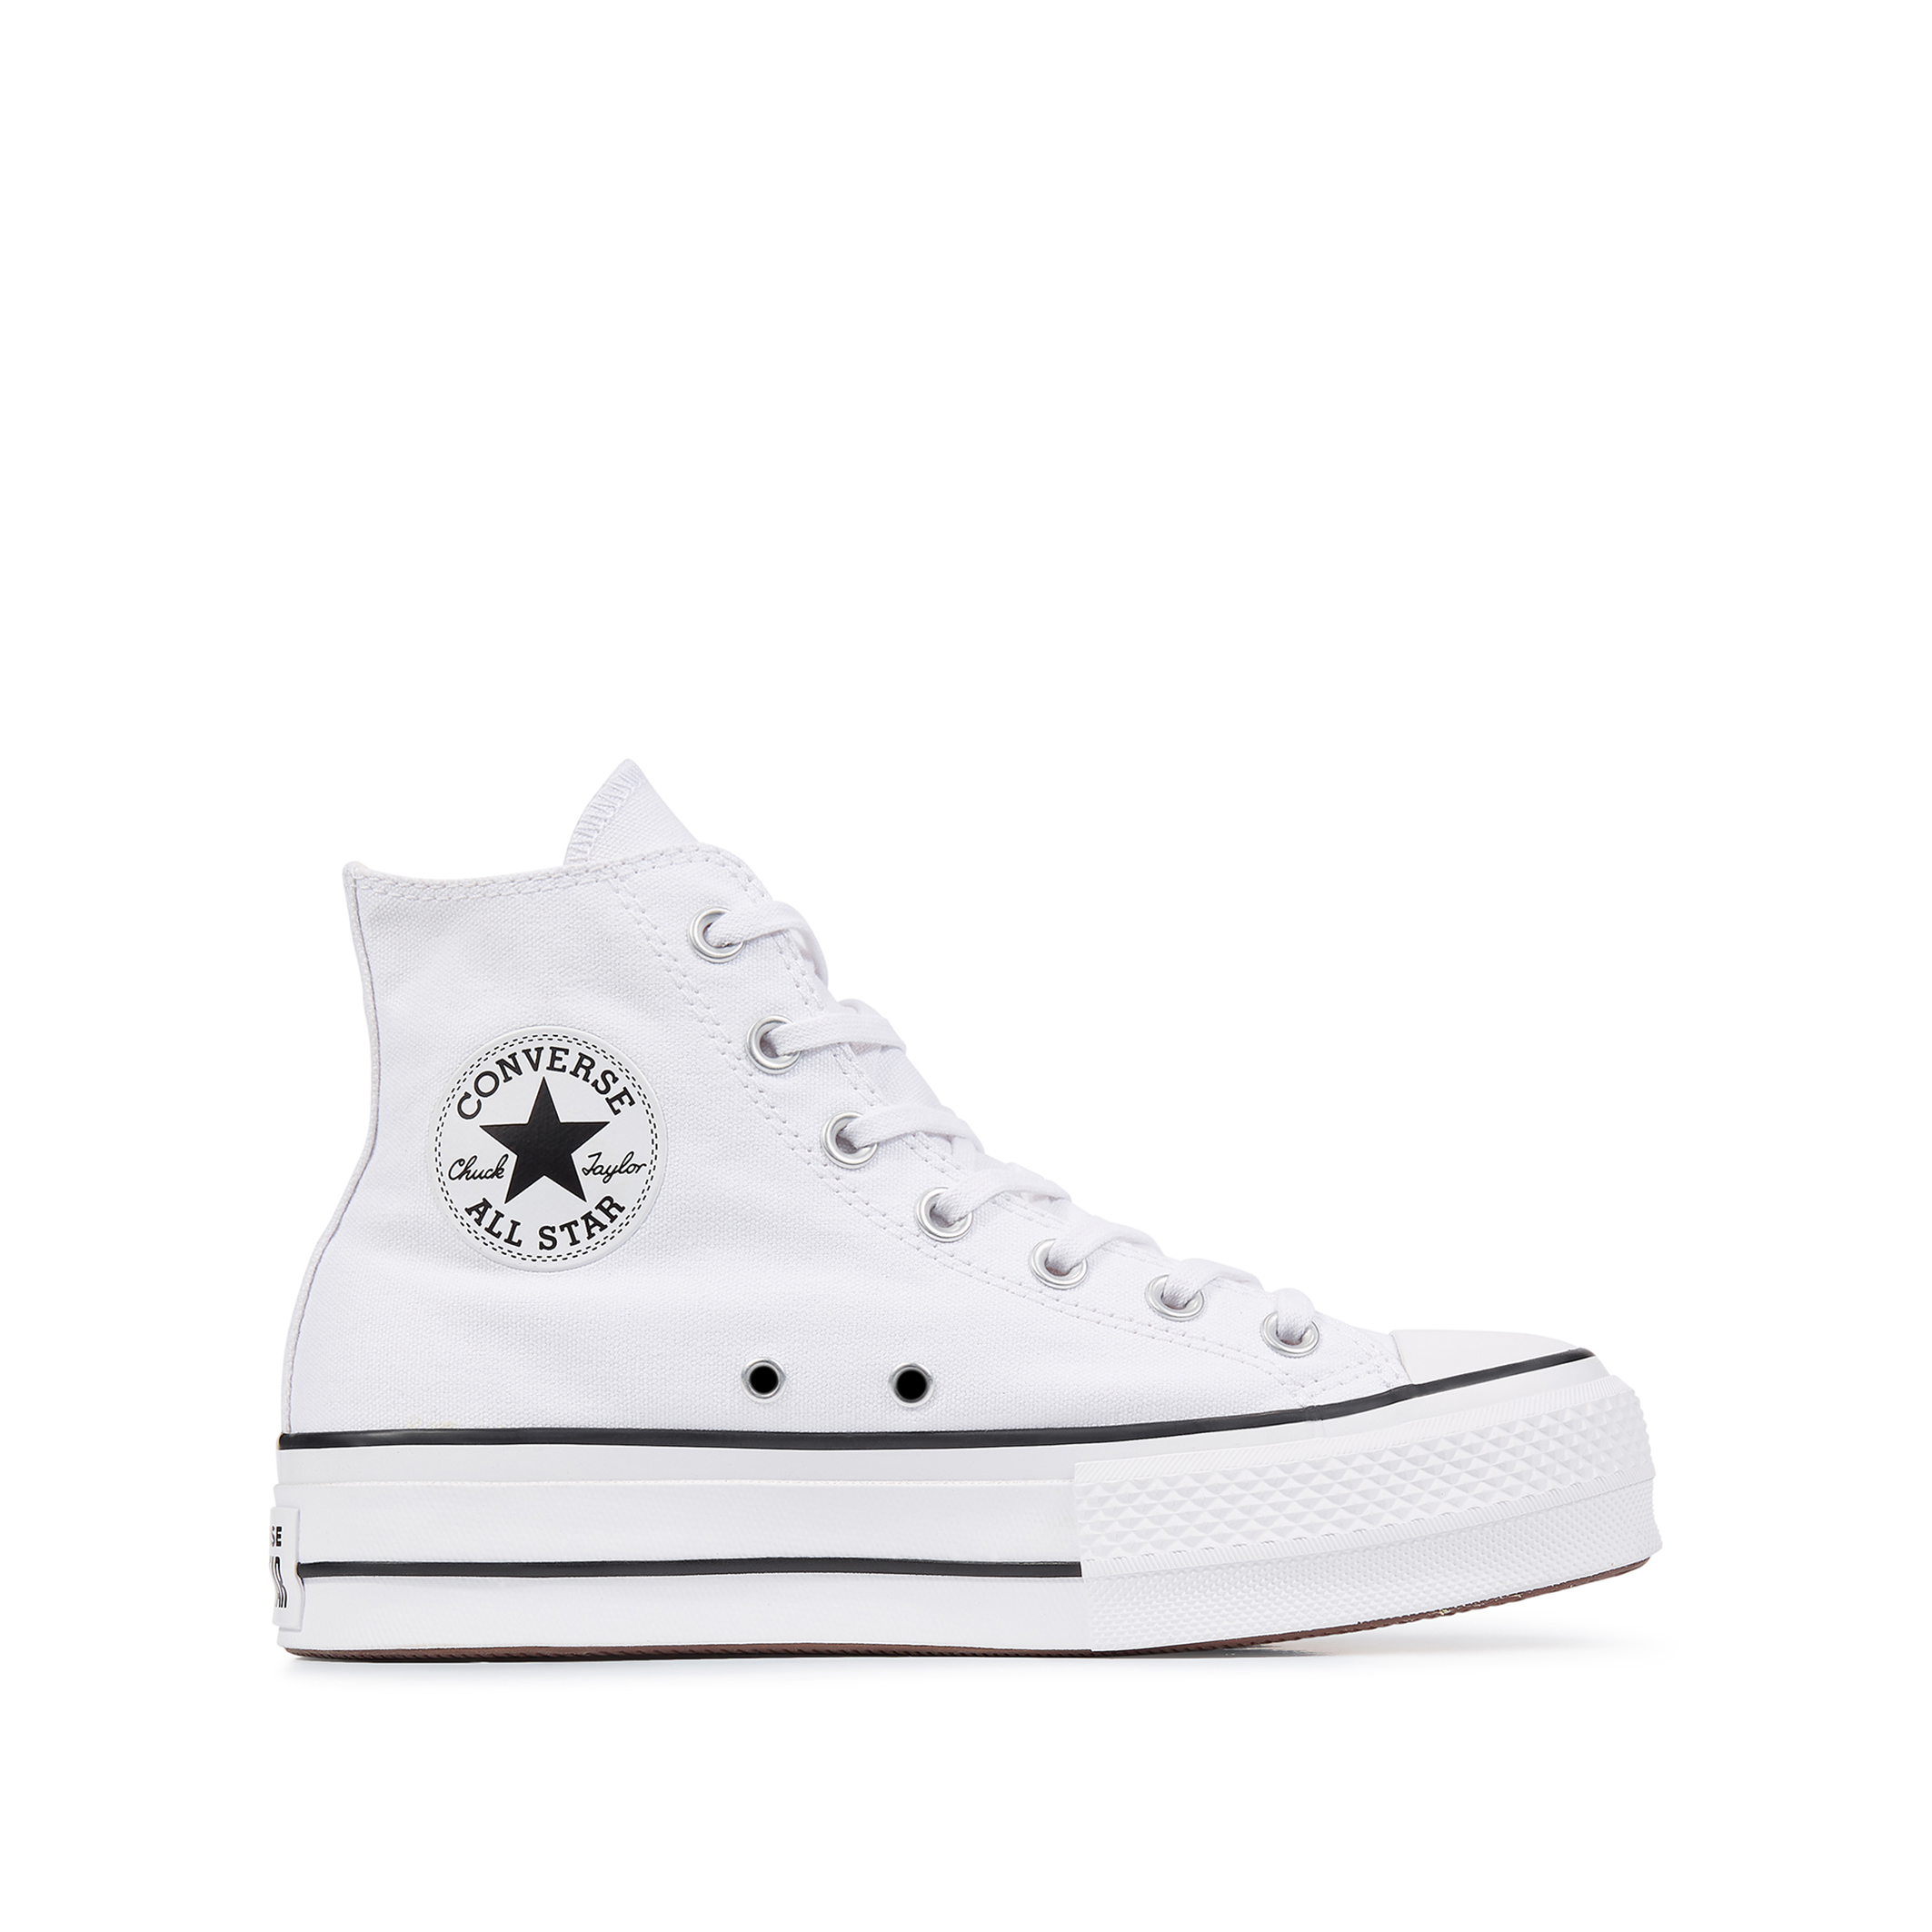 Chuck taylor all star lift canvas high top flatform trainers , white ...